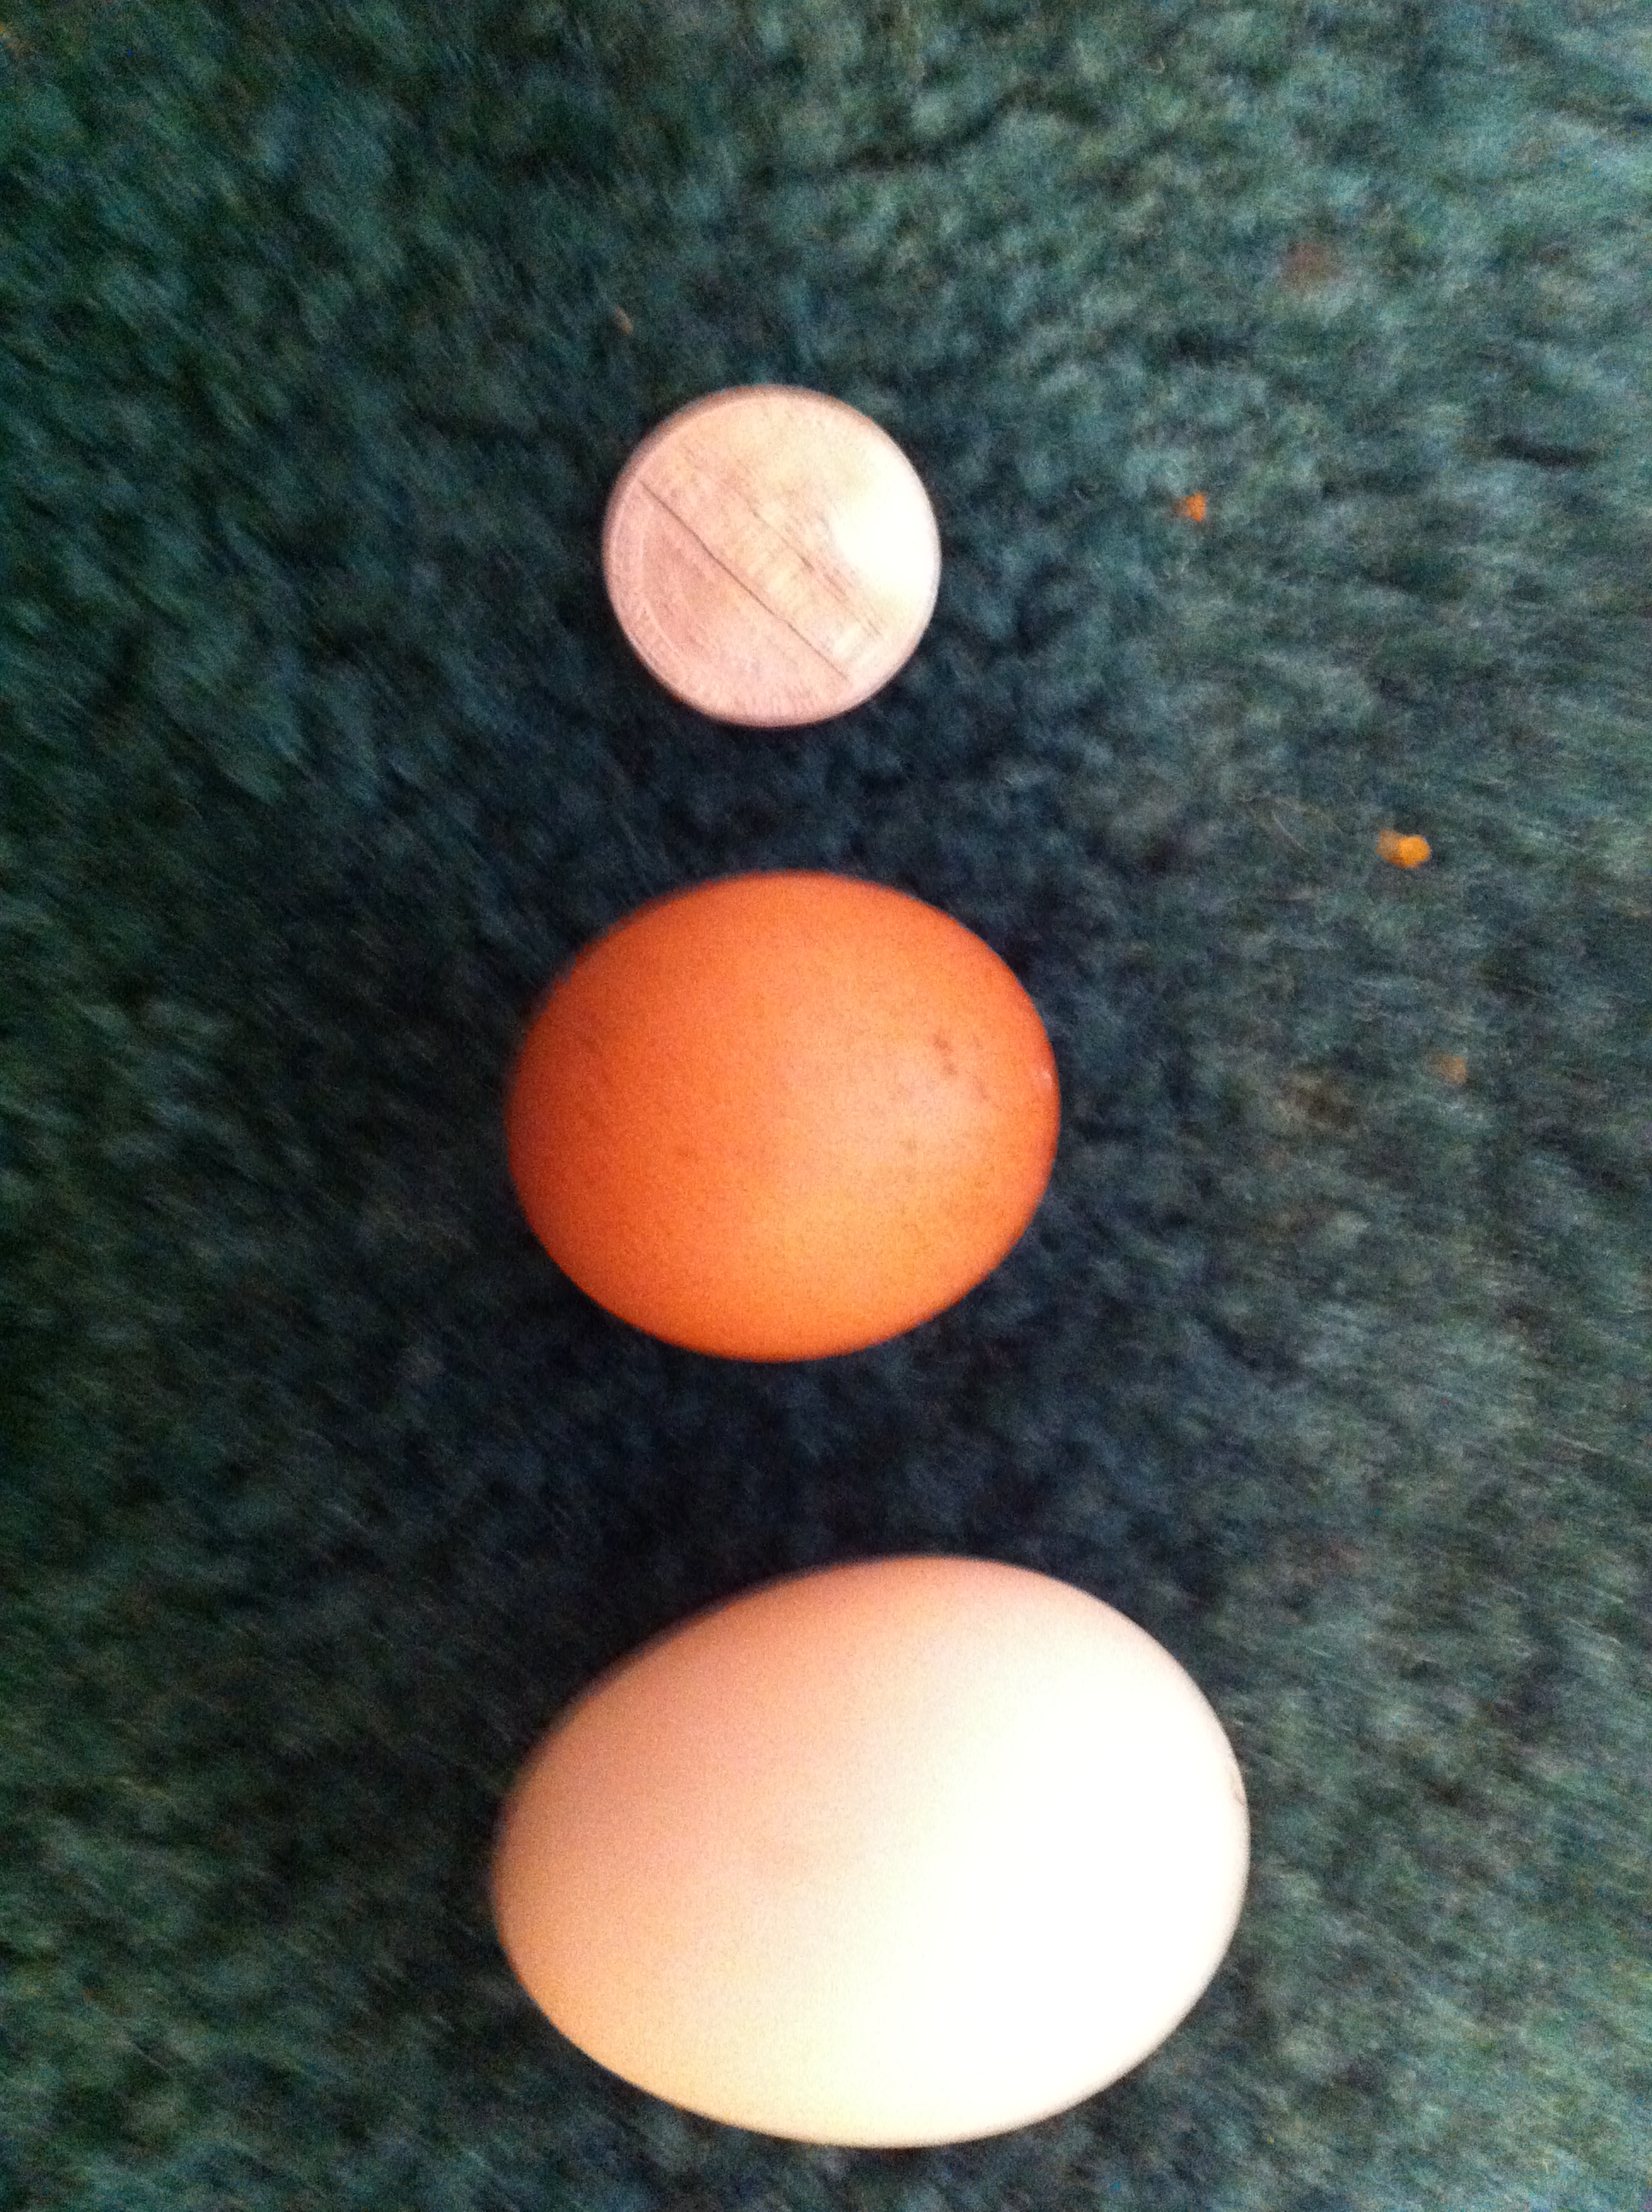 the bottom egg is a bantam egg and the egg above it is one of our Welsummer eggs this egg is smaller than any egg we have ever gotten